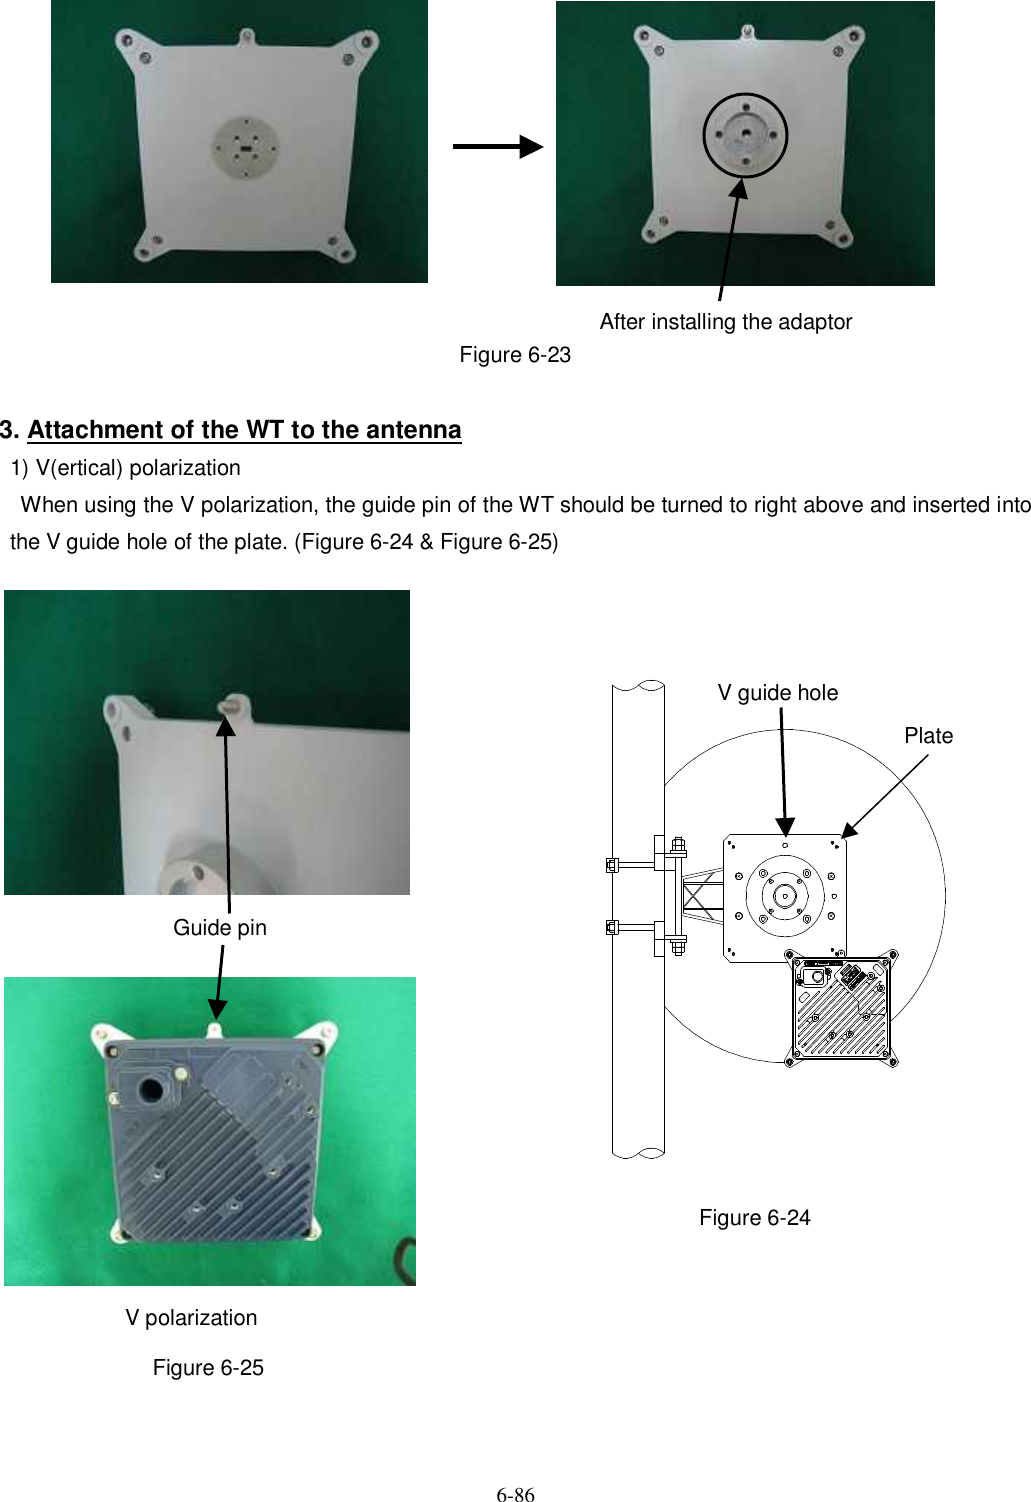   6-86            Figure 6-23  3. Attachment of the WT to the antenna 1) V(ertical) polarization     When using the V polarization, the guide pin of the WT should be turned to right above and inserted into the V guide hole of the plate. (Figure 6-24 &amp; Figure 6-25)                                  Figure 6-24           Figure 6-25   V polarization Guide pin After installing the adaptor V guide hole Plate ＴＯＰＶＴＯＰ ＨＥＴＨＥＲ